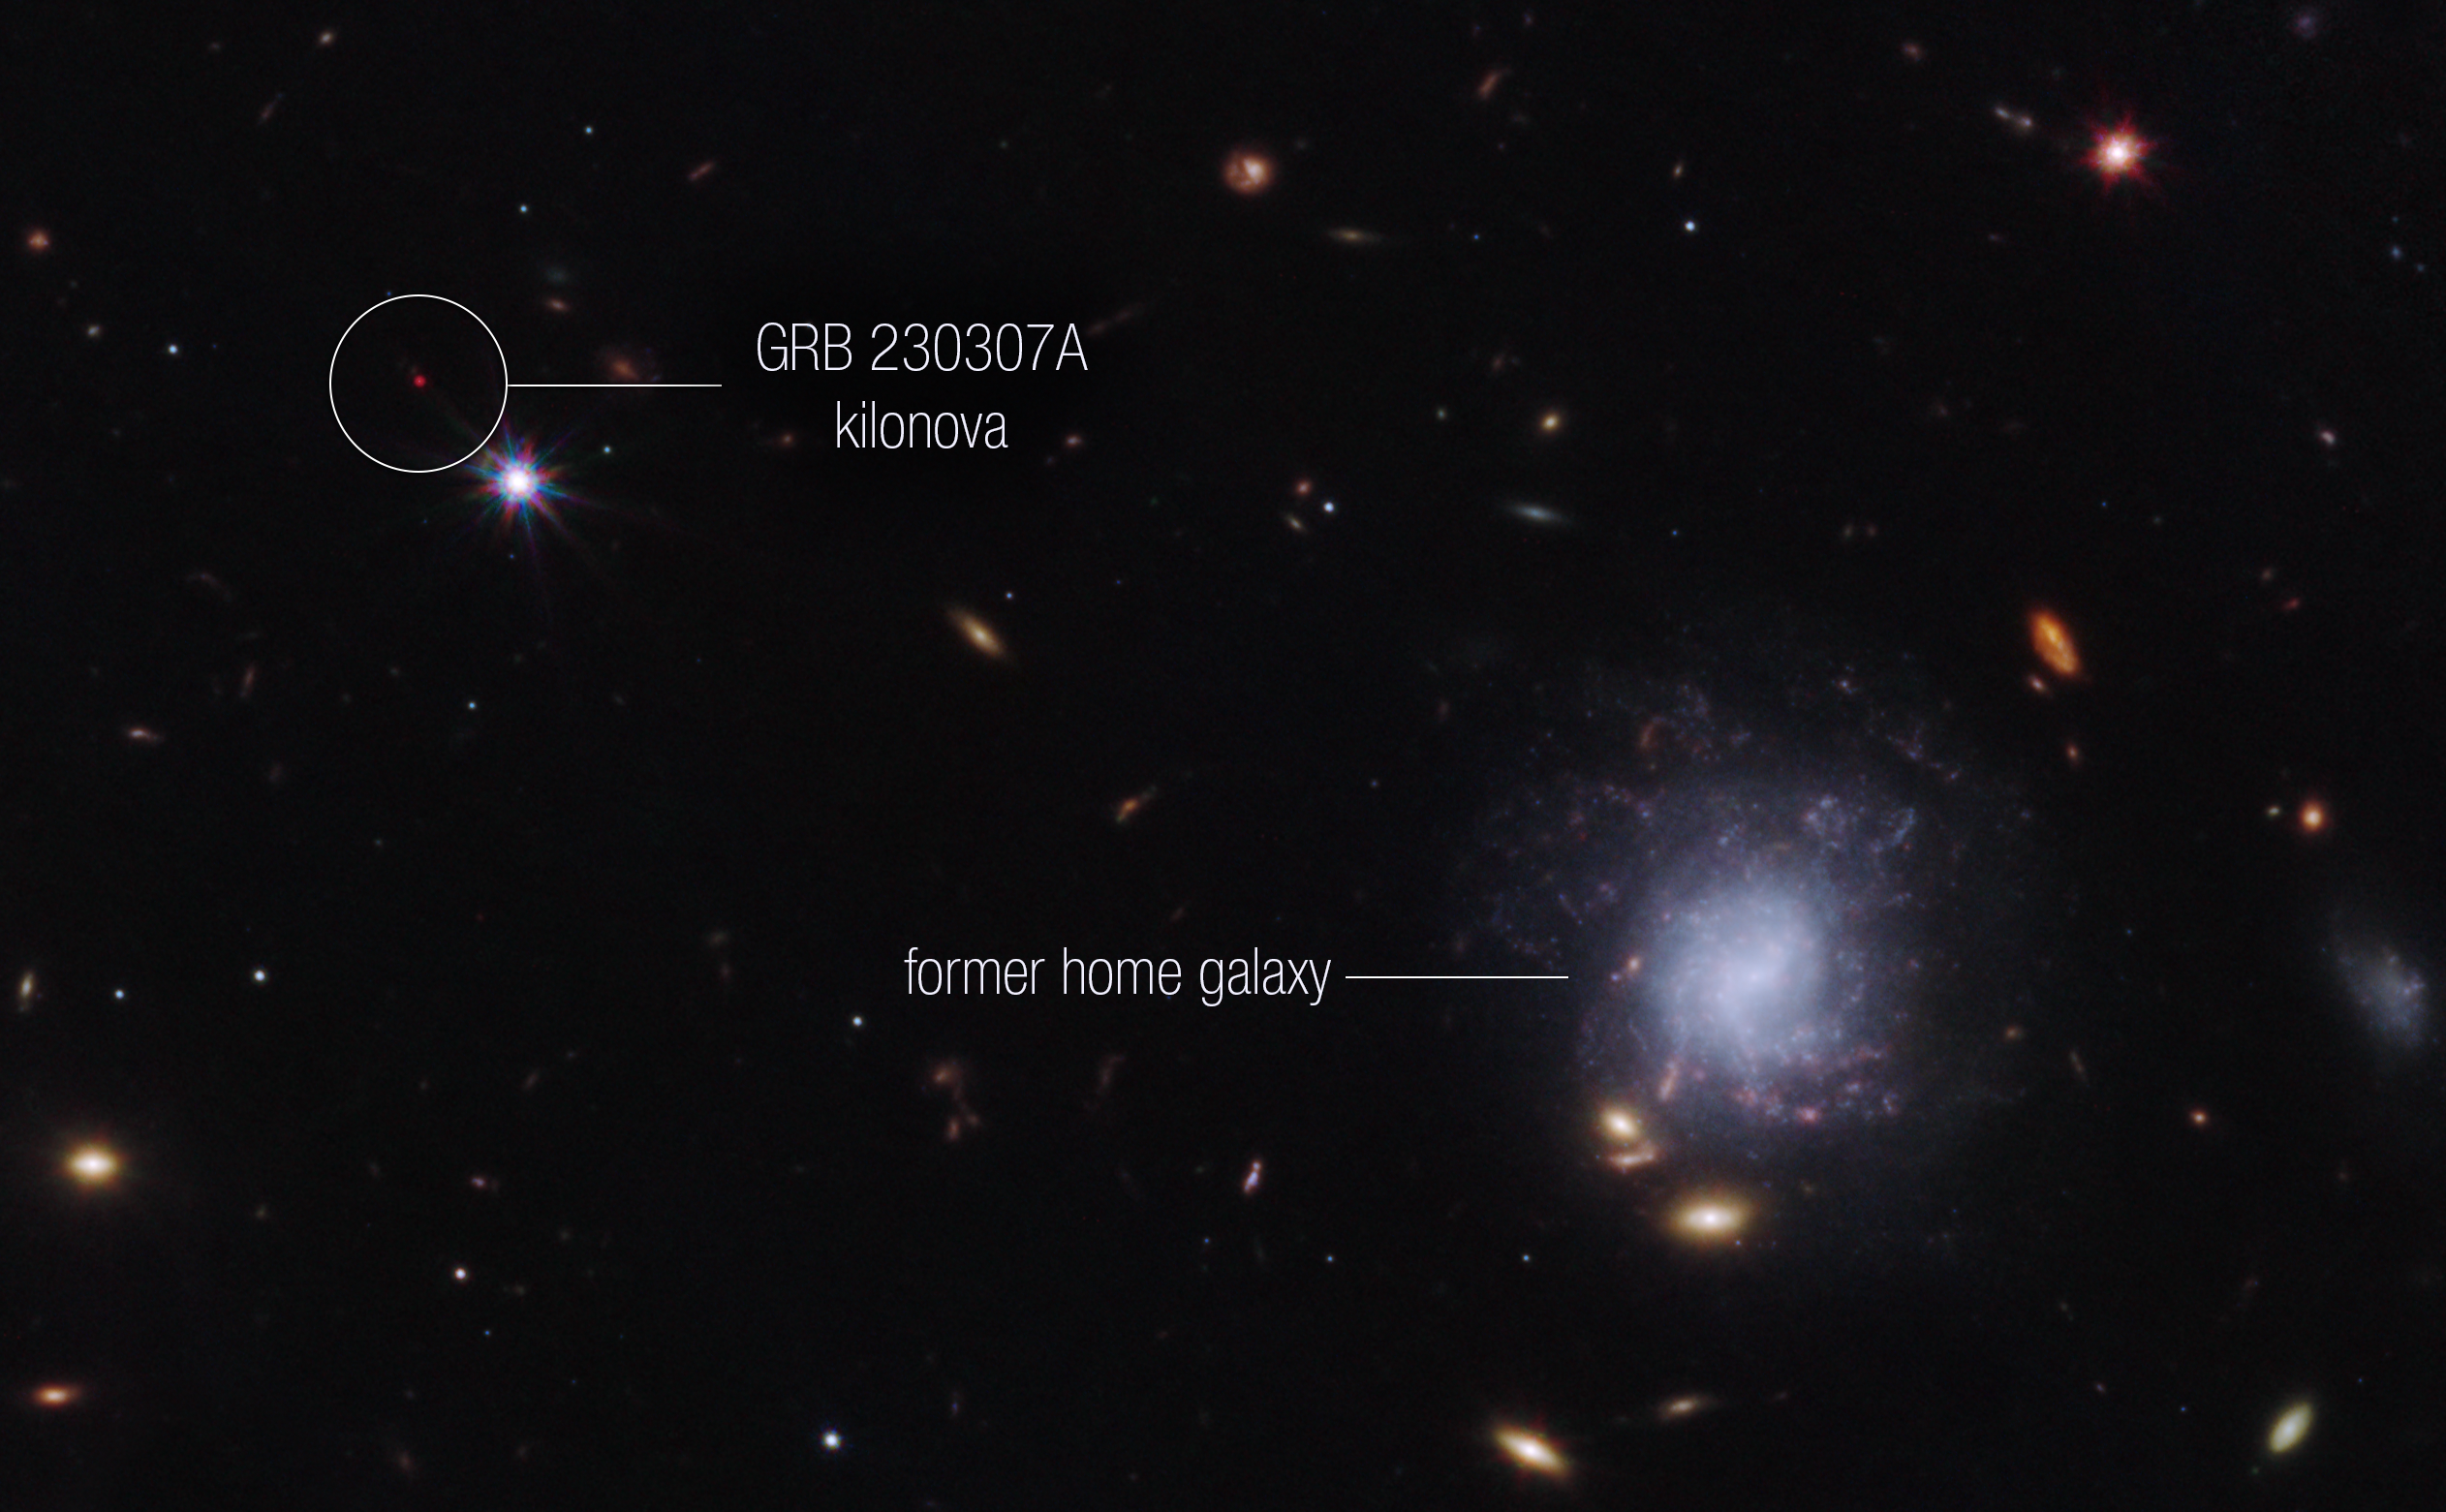 GRB 230307A’s kilonova and its former home galaxy among their local environment of other galaxies and foreground stars. 